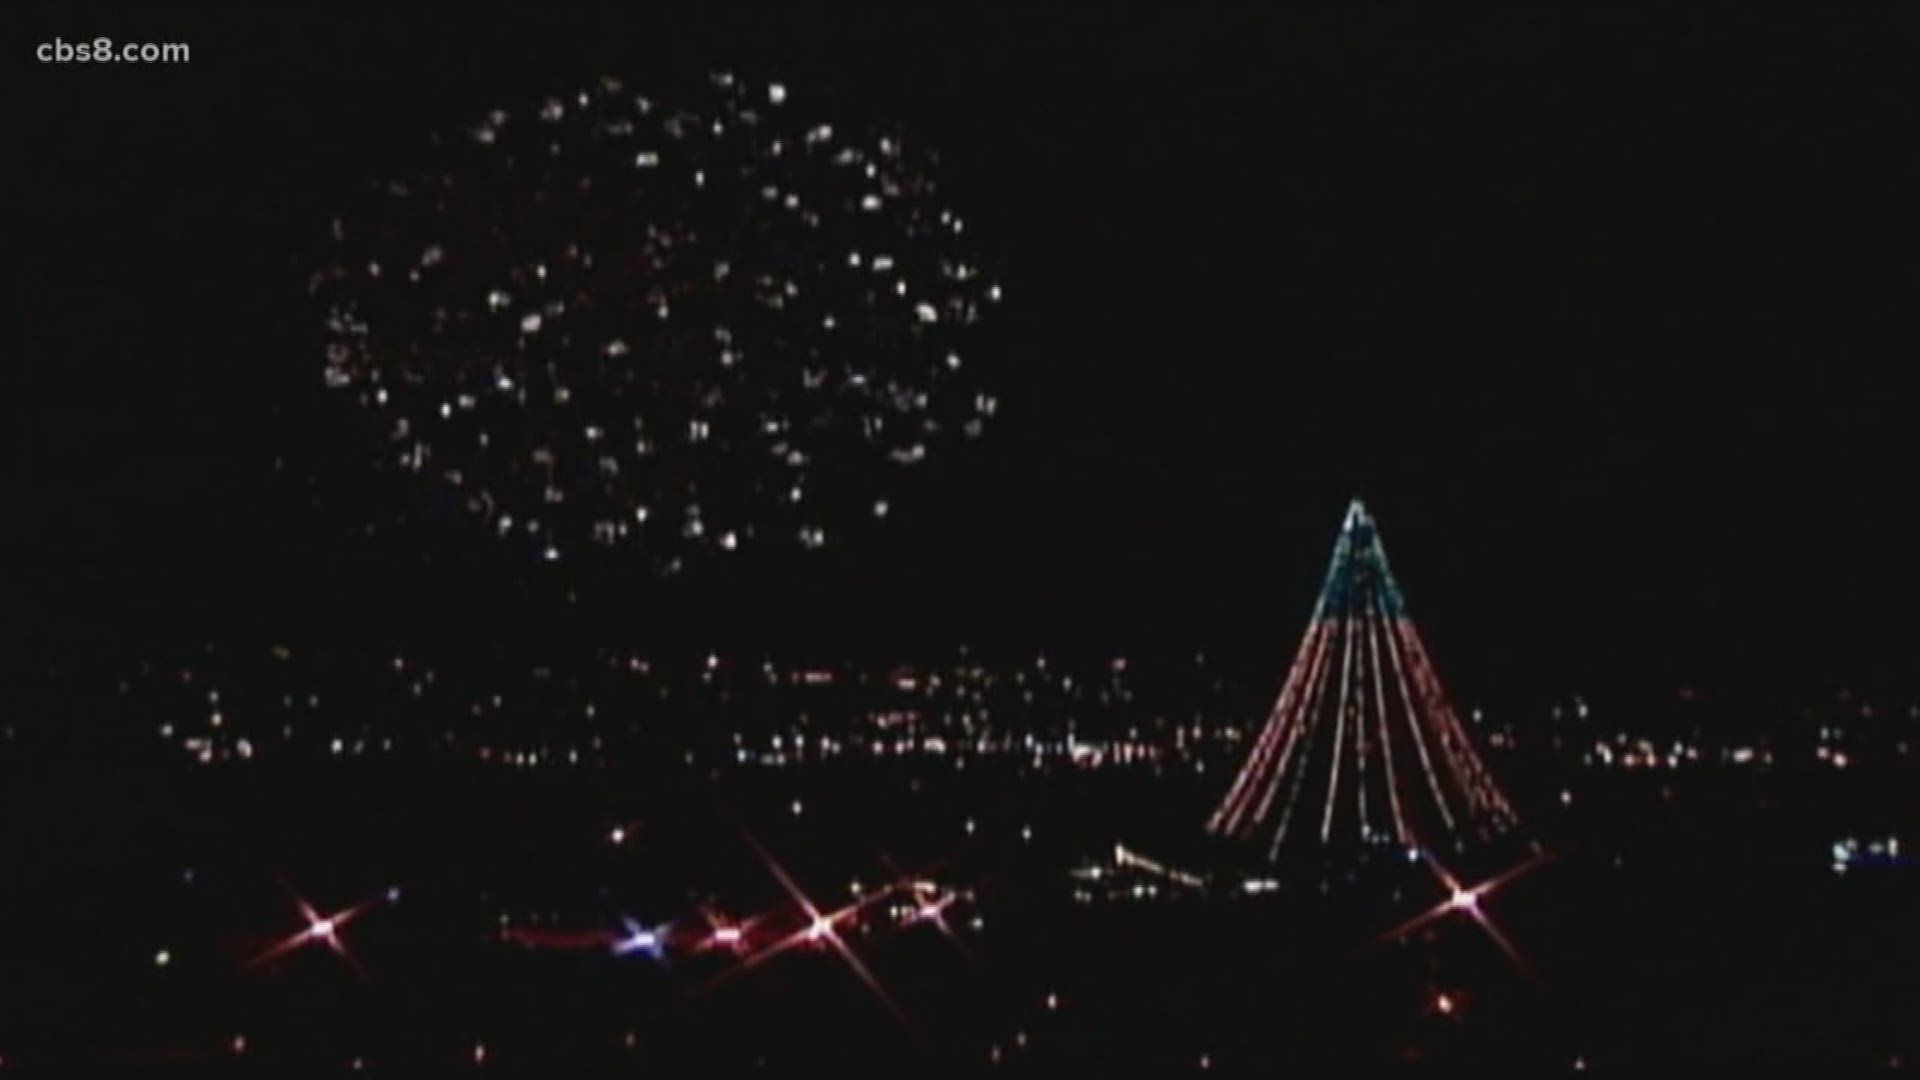 While the park says the fireworks will be back because of requests from the public, some San Diegans have voiced concerns over noise and pollution.